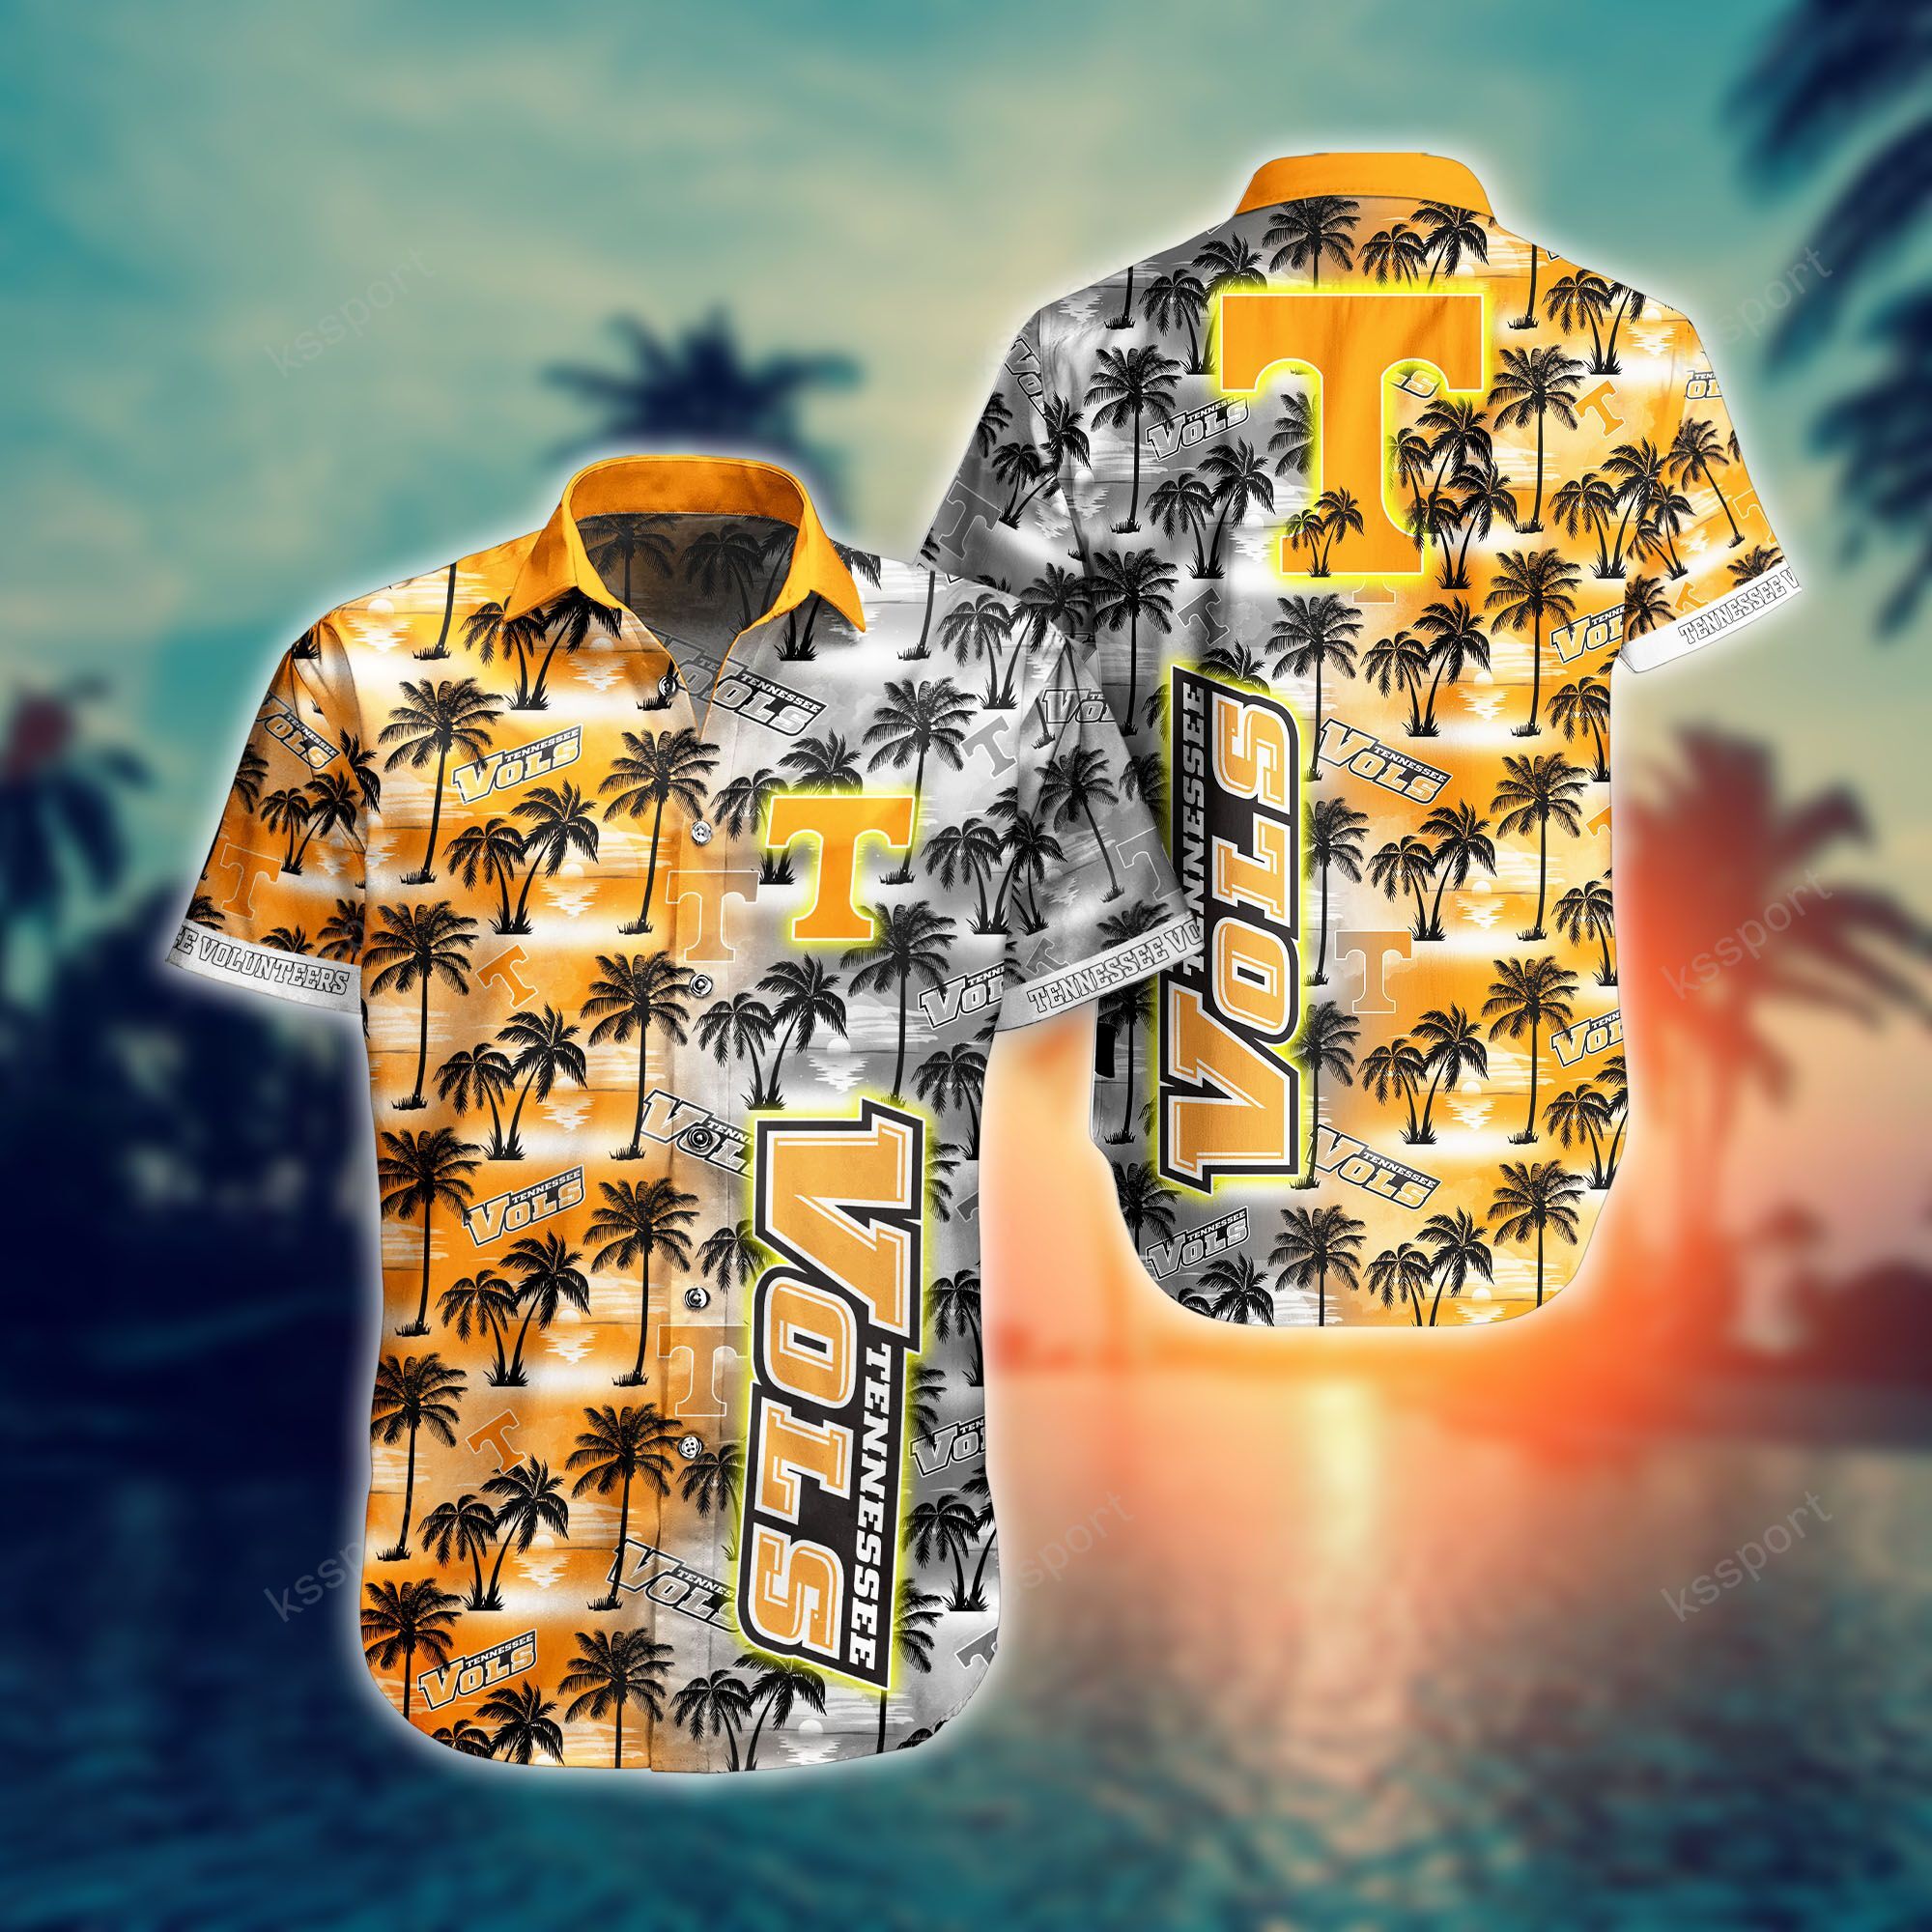 Treat yourself to a cool Hawaiian set today! 62